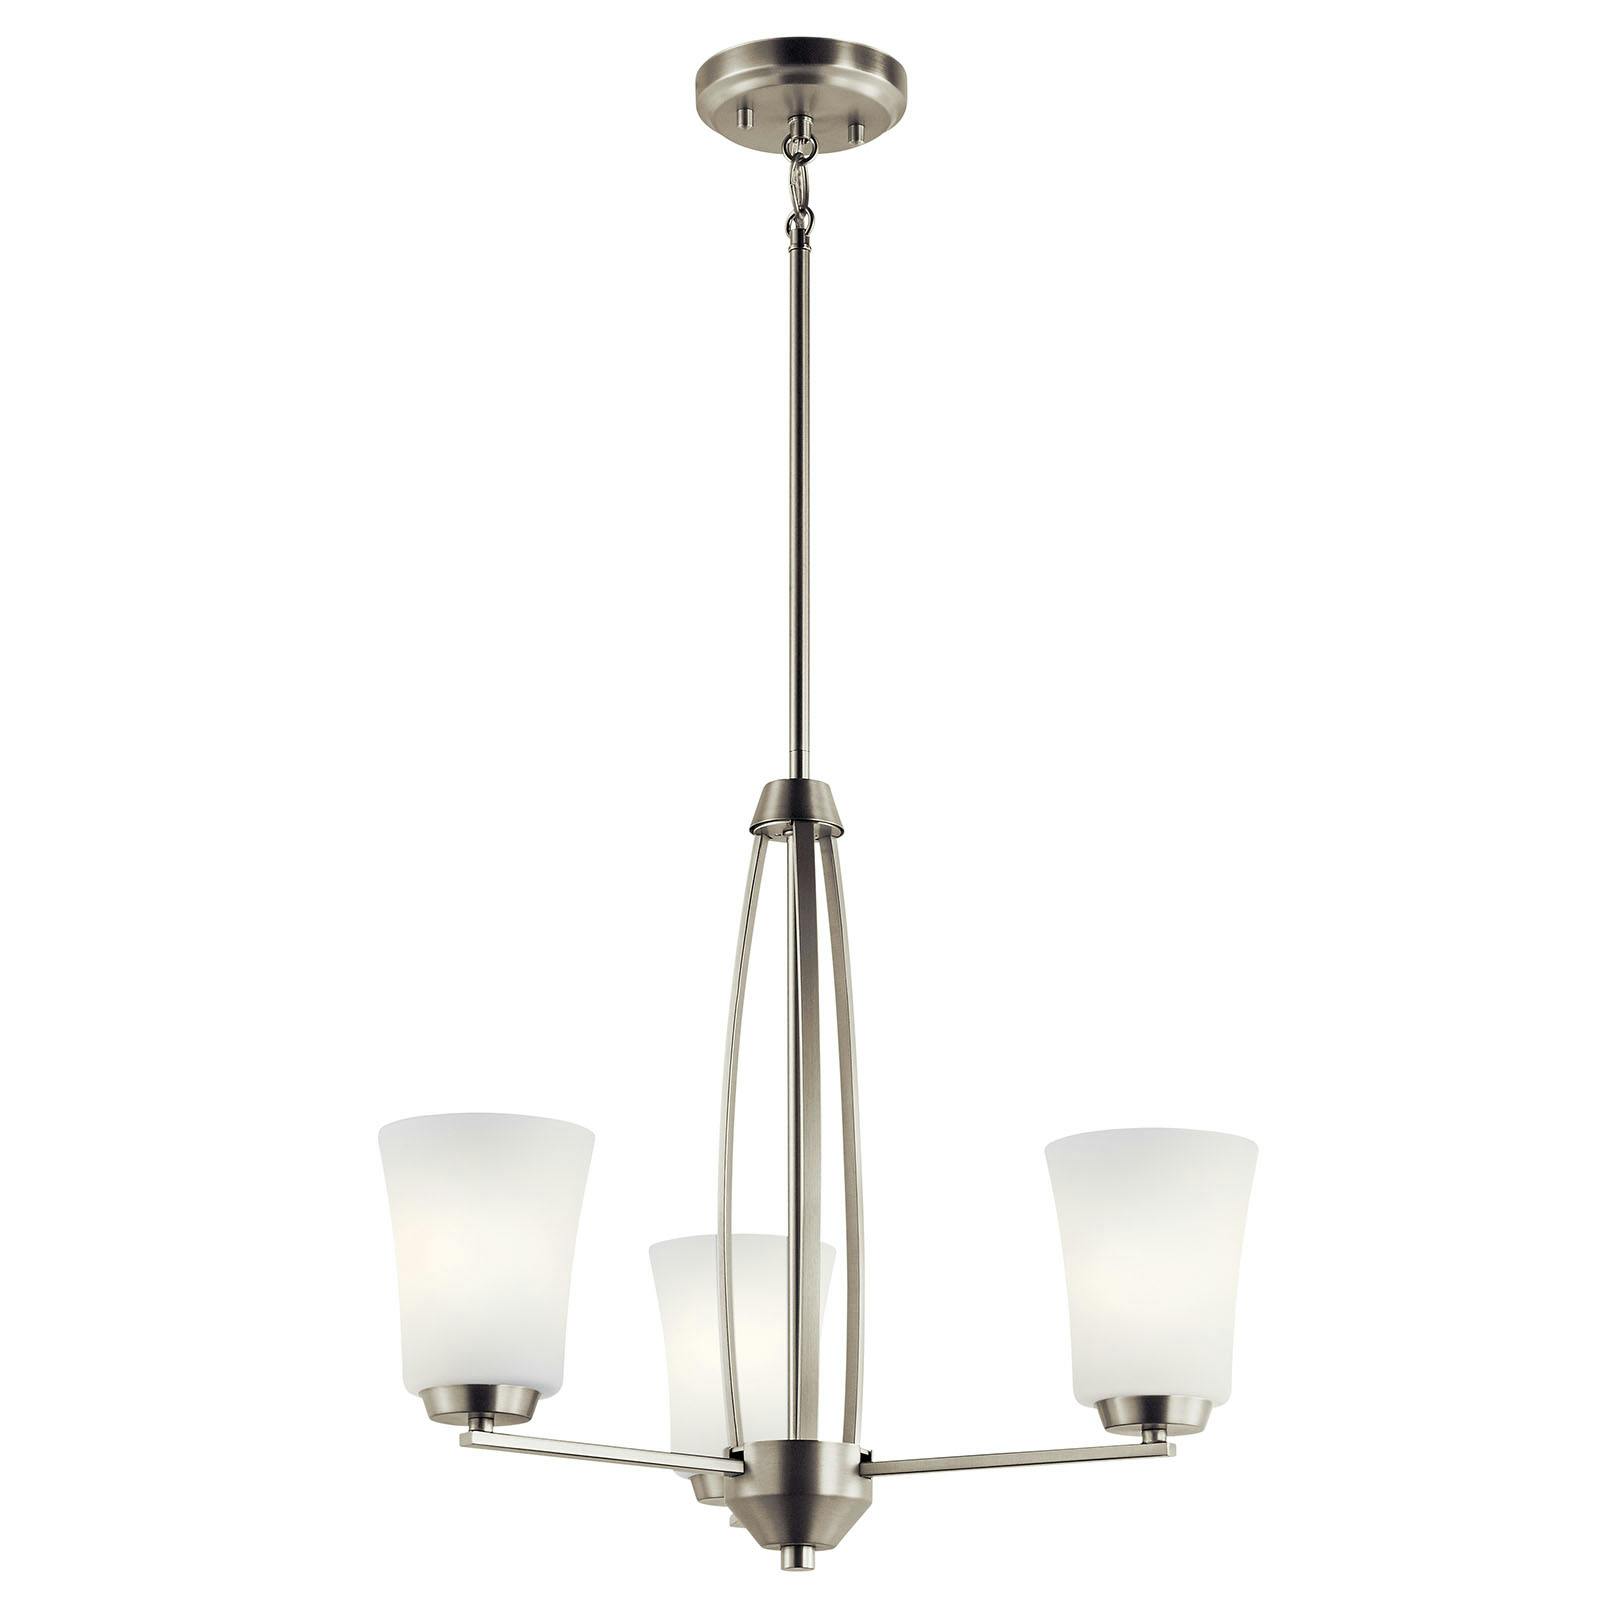 Tao 3 Light Chandelier Brushed Nickel on a white background